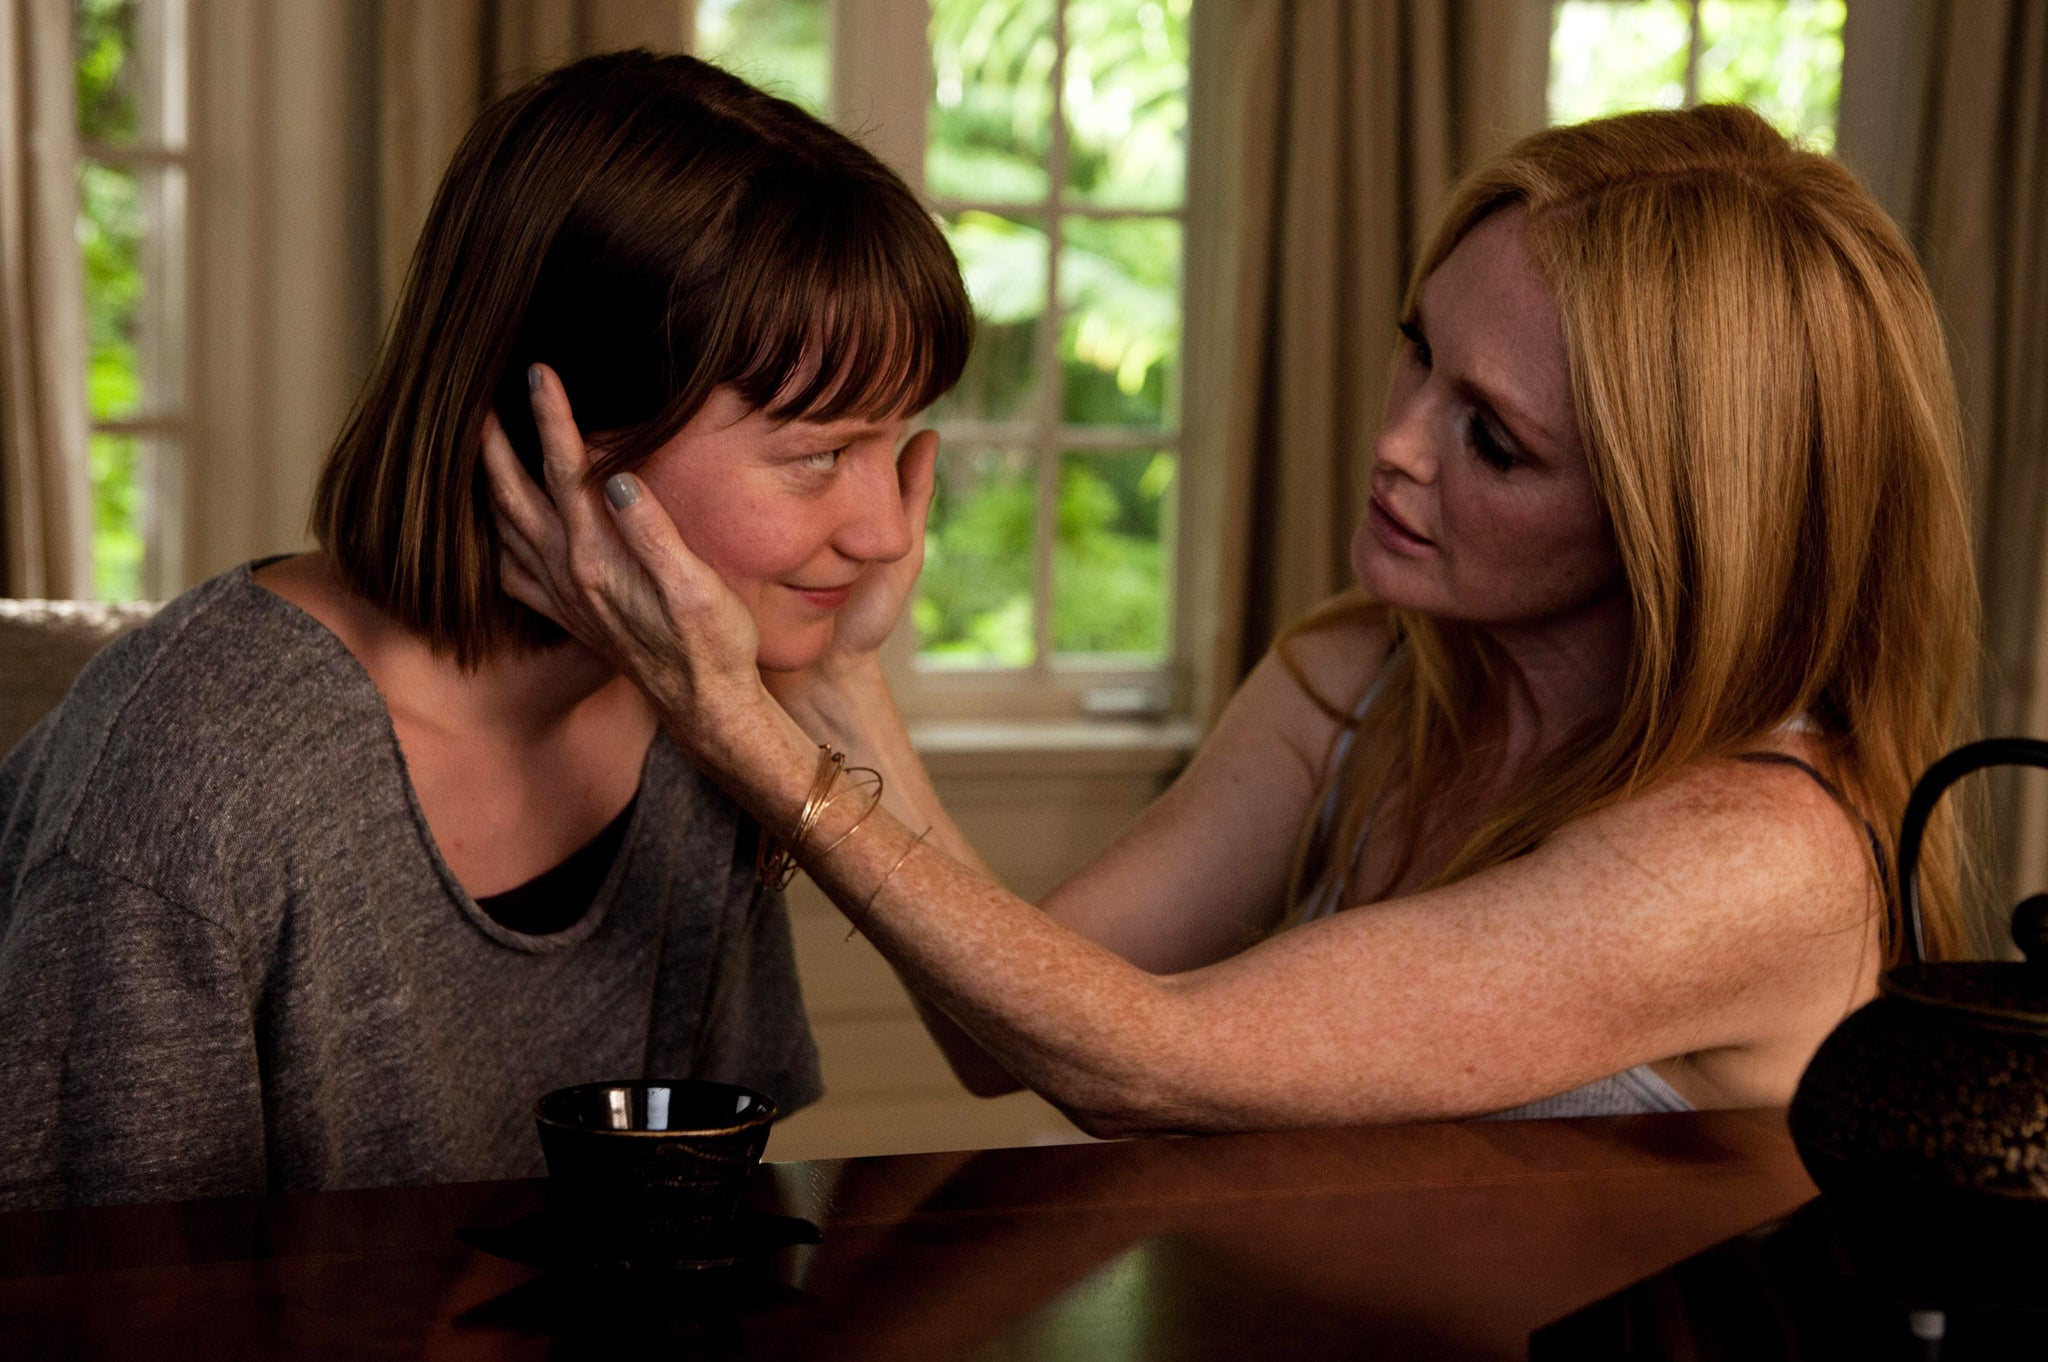 Mia Wasikowska in a scene from 'Maps to the Stars'